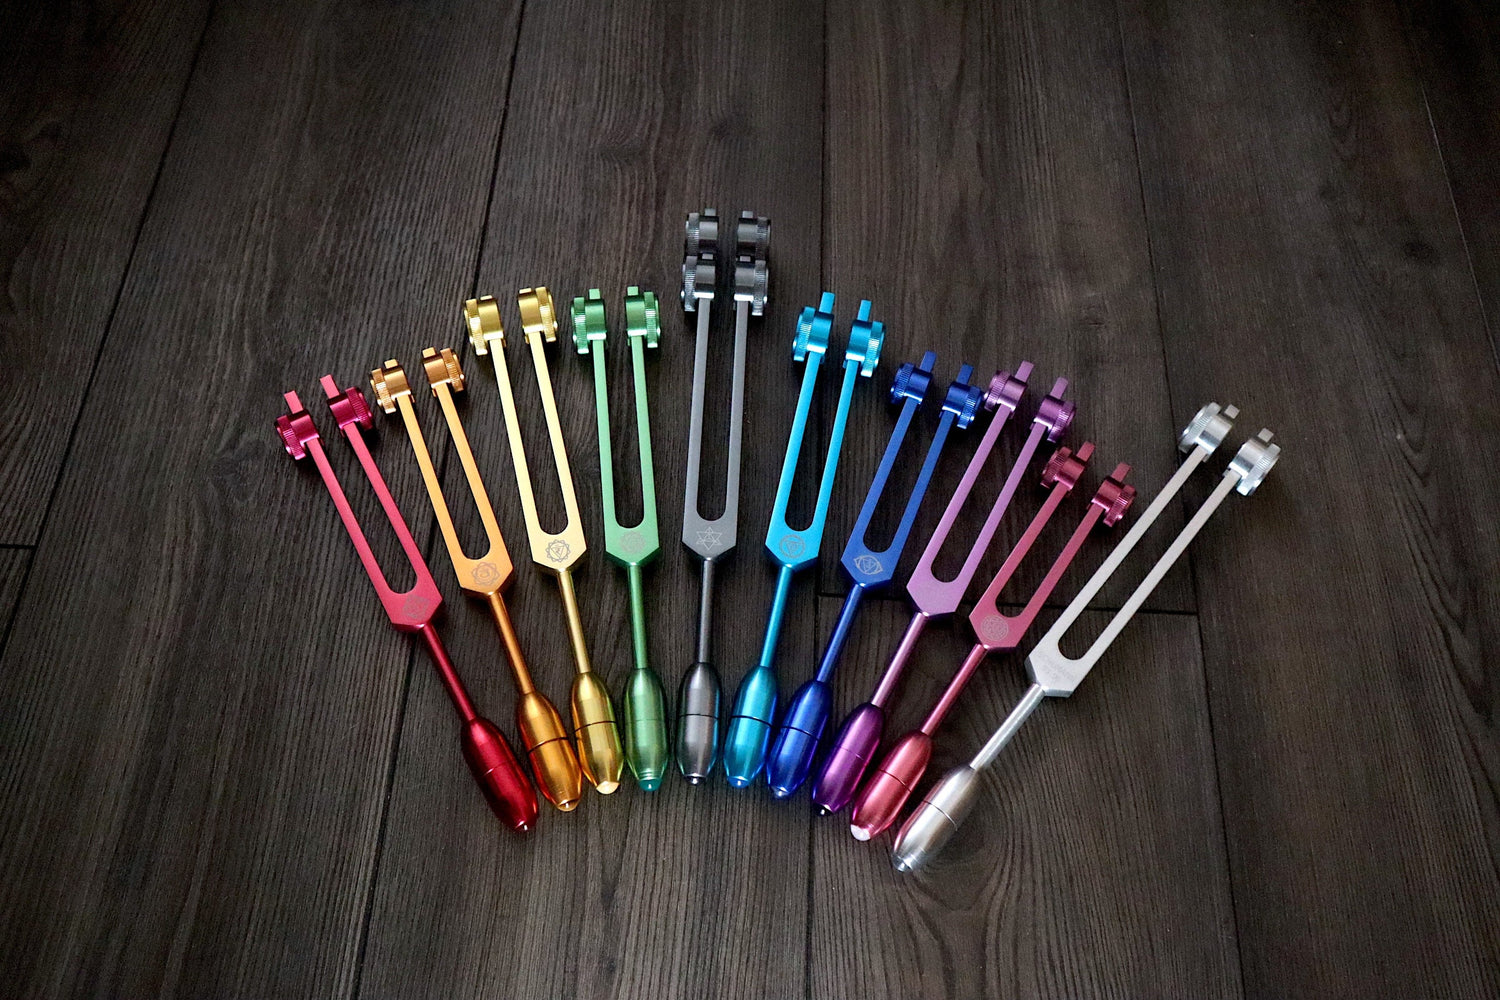 Myriad Melodies' Perfect Pitch (5 Cents) 432 Hz 8-14 Classic Rainbow Set - 10 Chakra Tuning Forks - 10 Crystal Attenuators - Cases